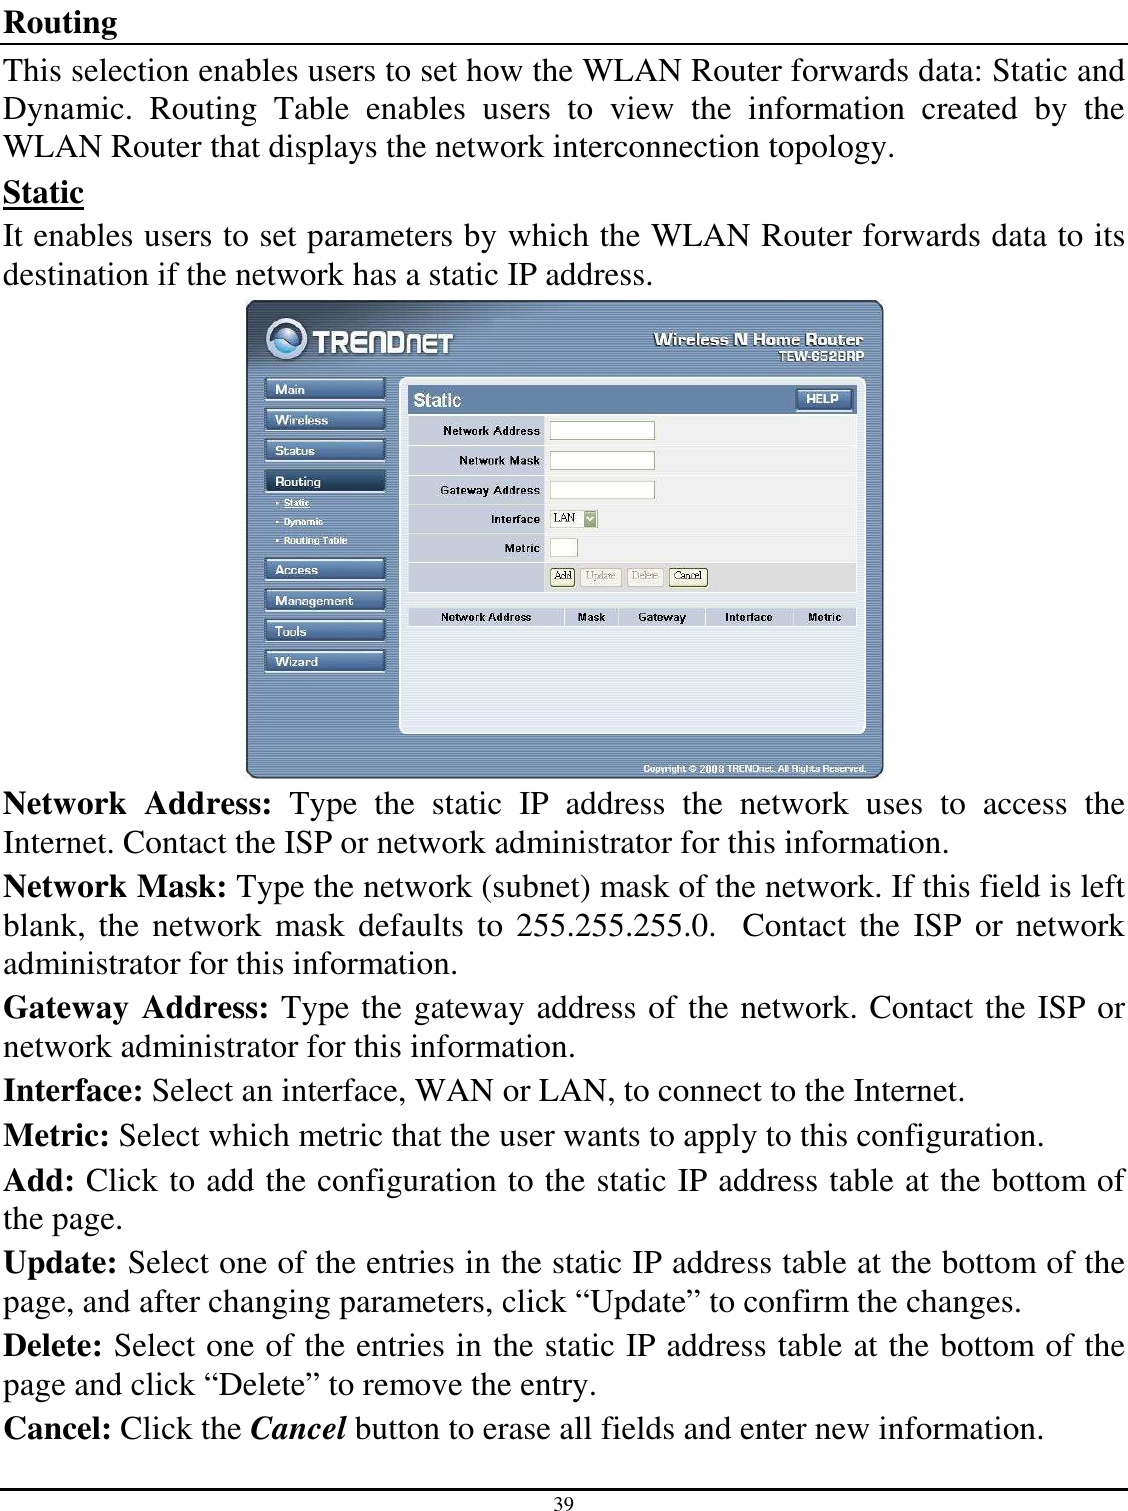 39  Routing This selection enables users to set how the WLAN Router forwards data: Static and Dynamic.  Routing  Table  enables  users  to  view  the  information  created  by  the WLAN Router that displays the network interconnection topology. Static It enables users to set parameters by which the WLAN Router forwards data to its destination if the network has a static IP address.  Network  Address:  Type  the  static  IP  address  the  network  uses  to  access  the Internet. Contact the ISP or network administrator for this information. Network Mask: Type the network (subnet) mask of the network. If this field is left blank,  the  network  mask defaults  to 255.255.255.0.   Contact the ISP  or network administrator for this information. Gateway Address: Type the gateway address of the network. Contact the ISP or network administrator for this information. Interface: Select an interface, WAN or LAN, to connect to the Internet. Metric: Select which metric that the user wants to apply to this configuration. Add: Click to add the configuration to the static IP address table at the bottom of the page. Update: Select one of the entries in the static IP address table at the bottom of the page, and after changing parameters, click “Update” to confirm the changes. Delete: Select one of the entries in the static IP address table at the bottom of the page and click “Delete” to remove the entry. Cancel: Click the Cancel button to erase all fields and enter new information. 